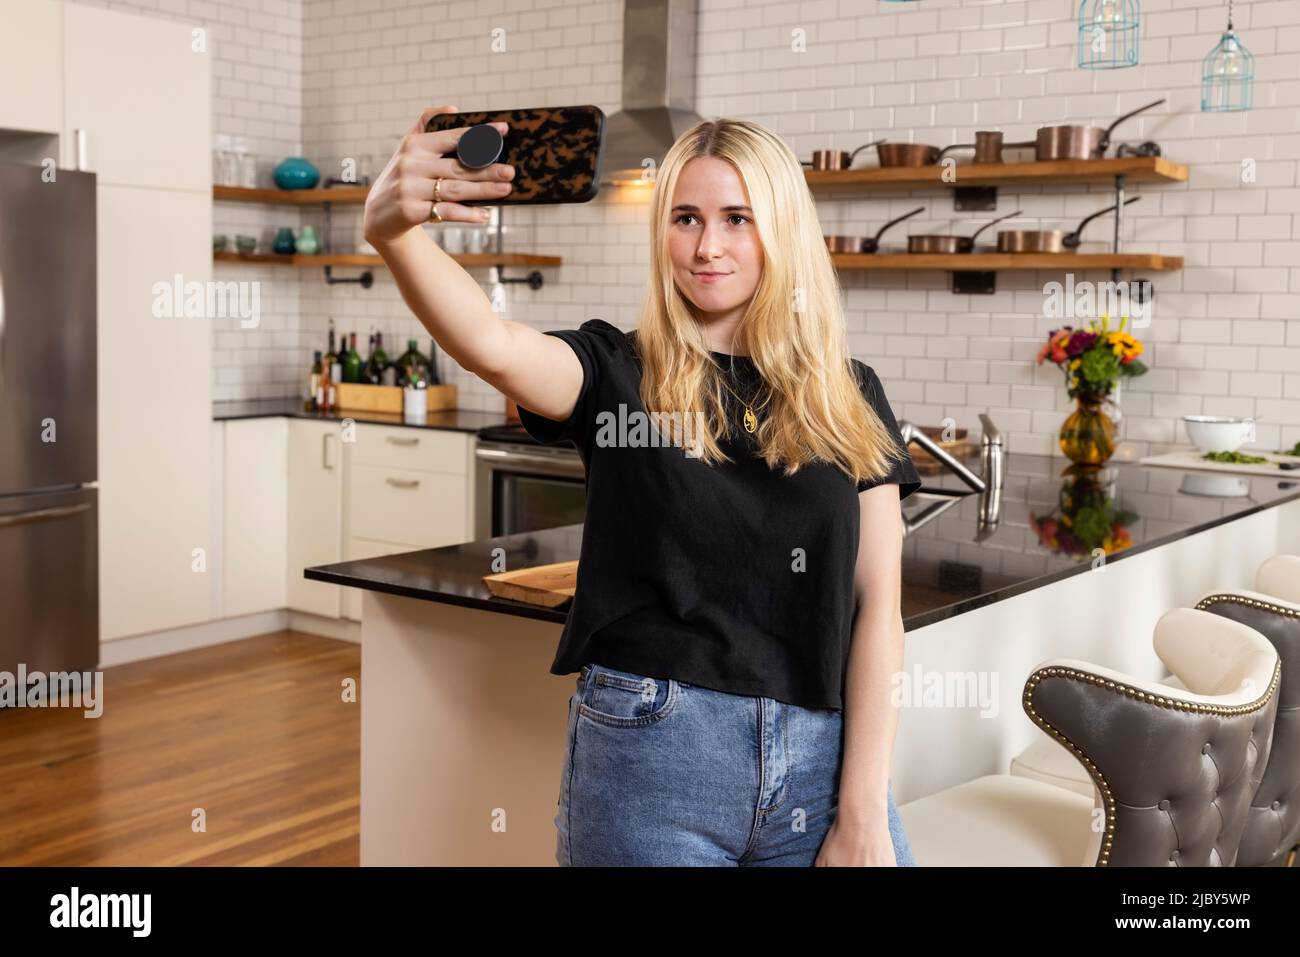 Young adult woman taking selfie while standing in her new apartment with kitchen in background. Stock Photo